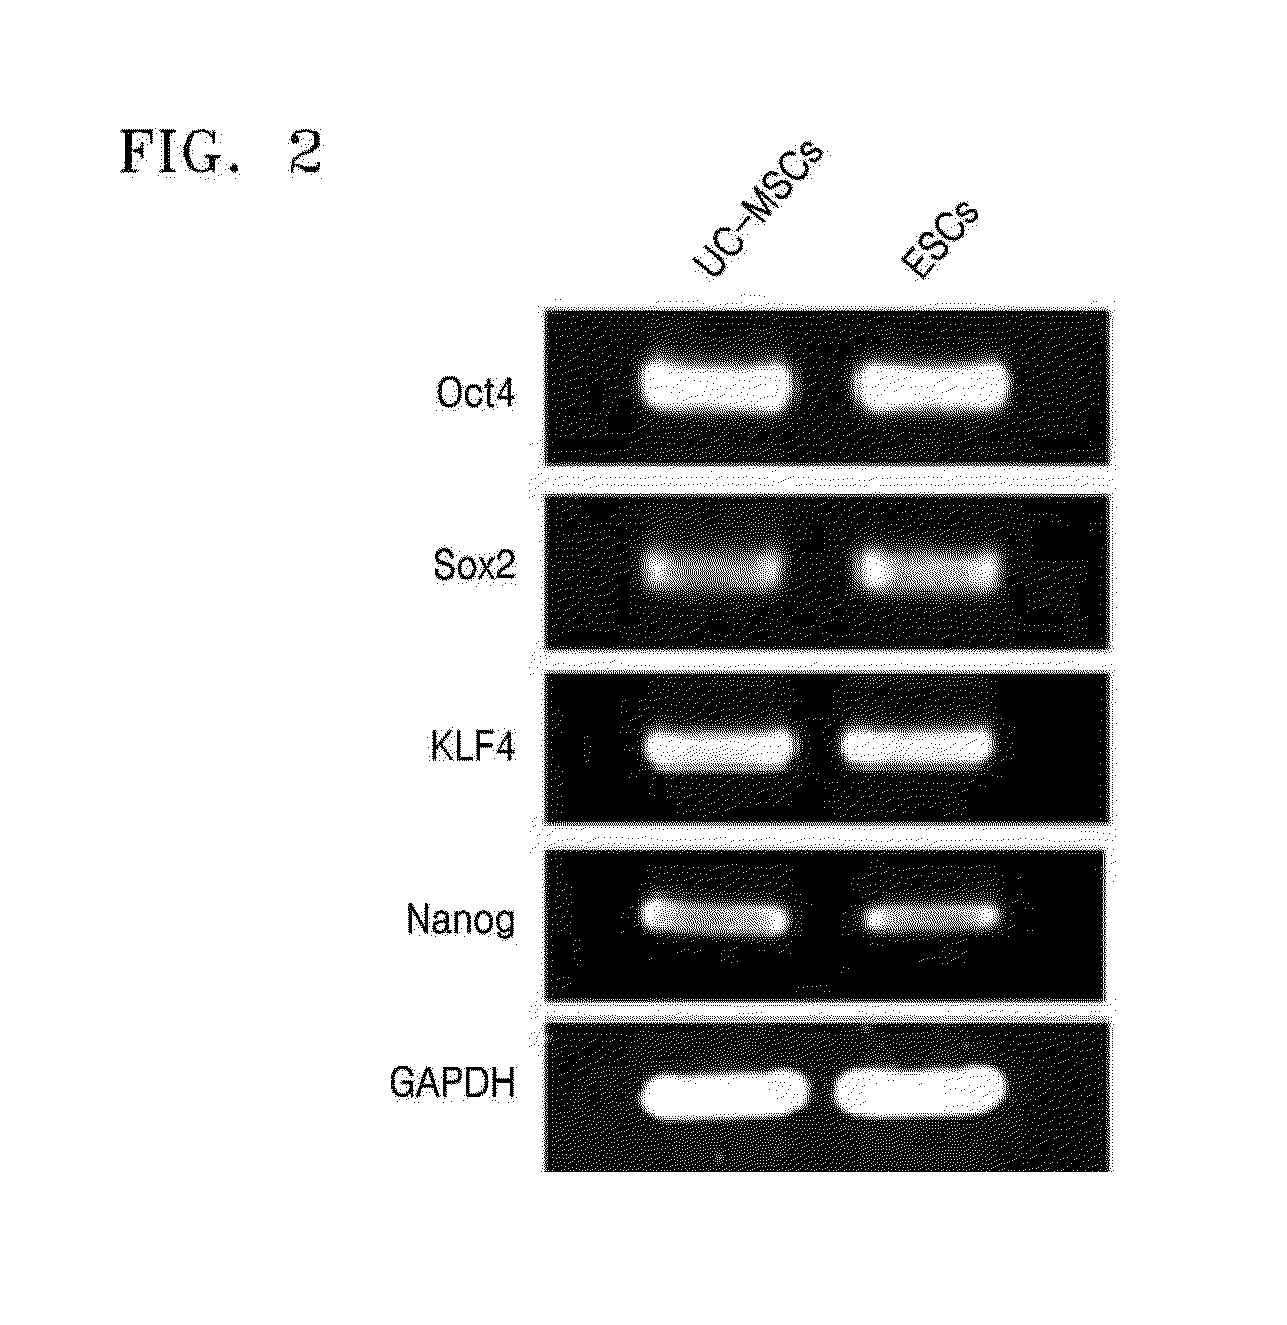 Cartilage cell treatment comprising collagen, hyaluronic acid derivative, and stem cell derived from mammal umbilical cord